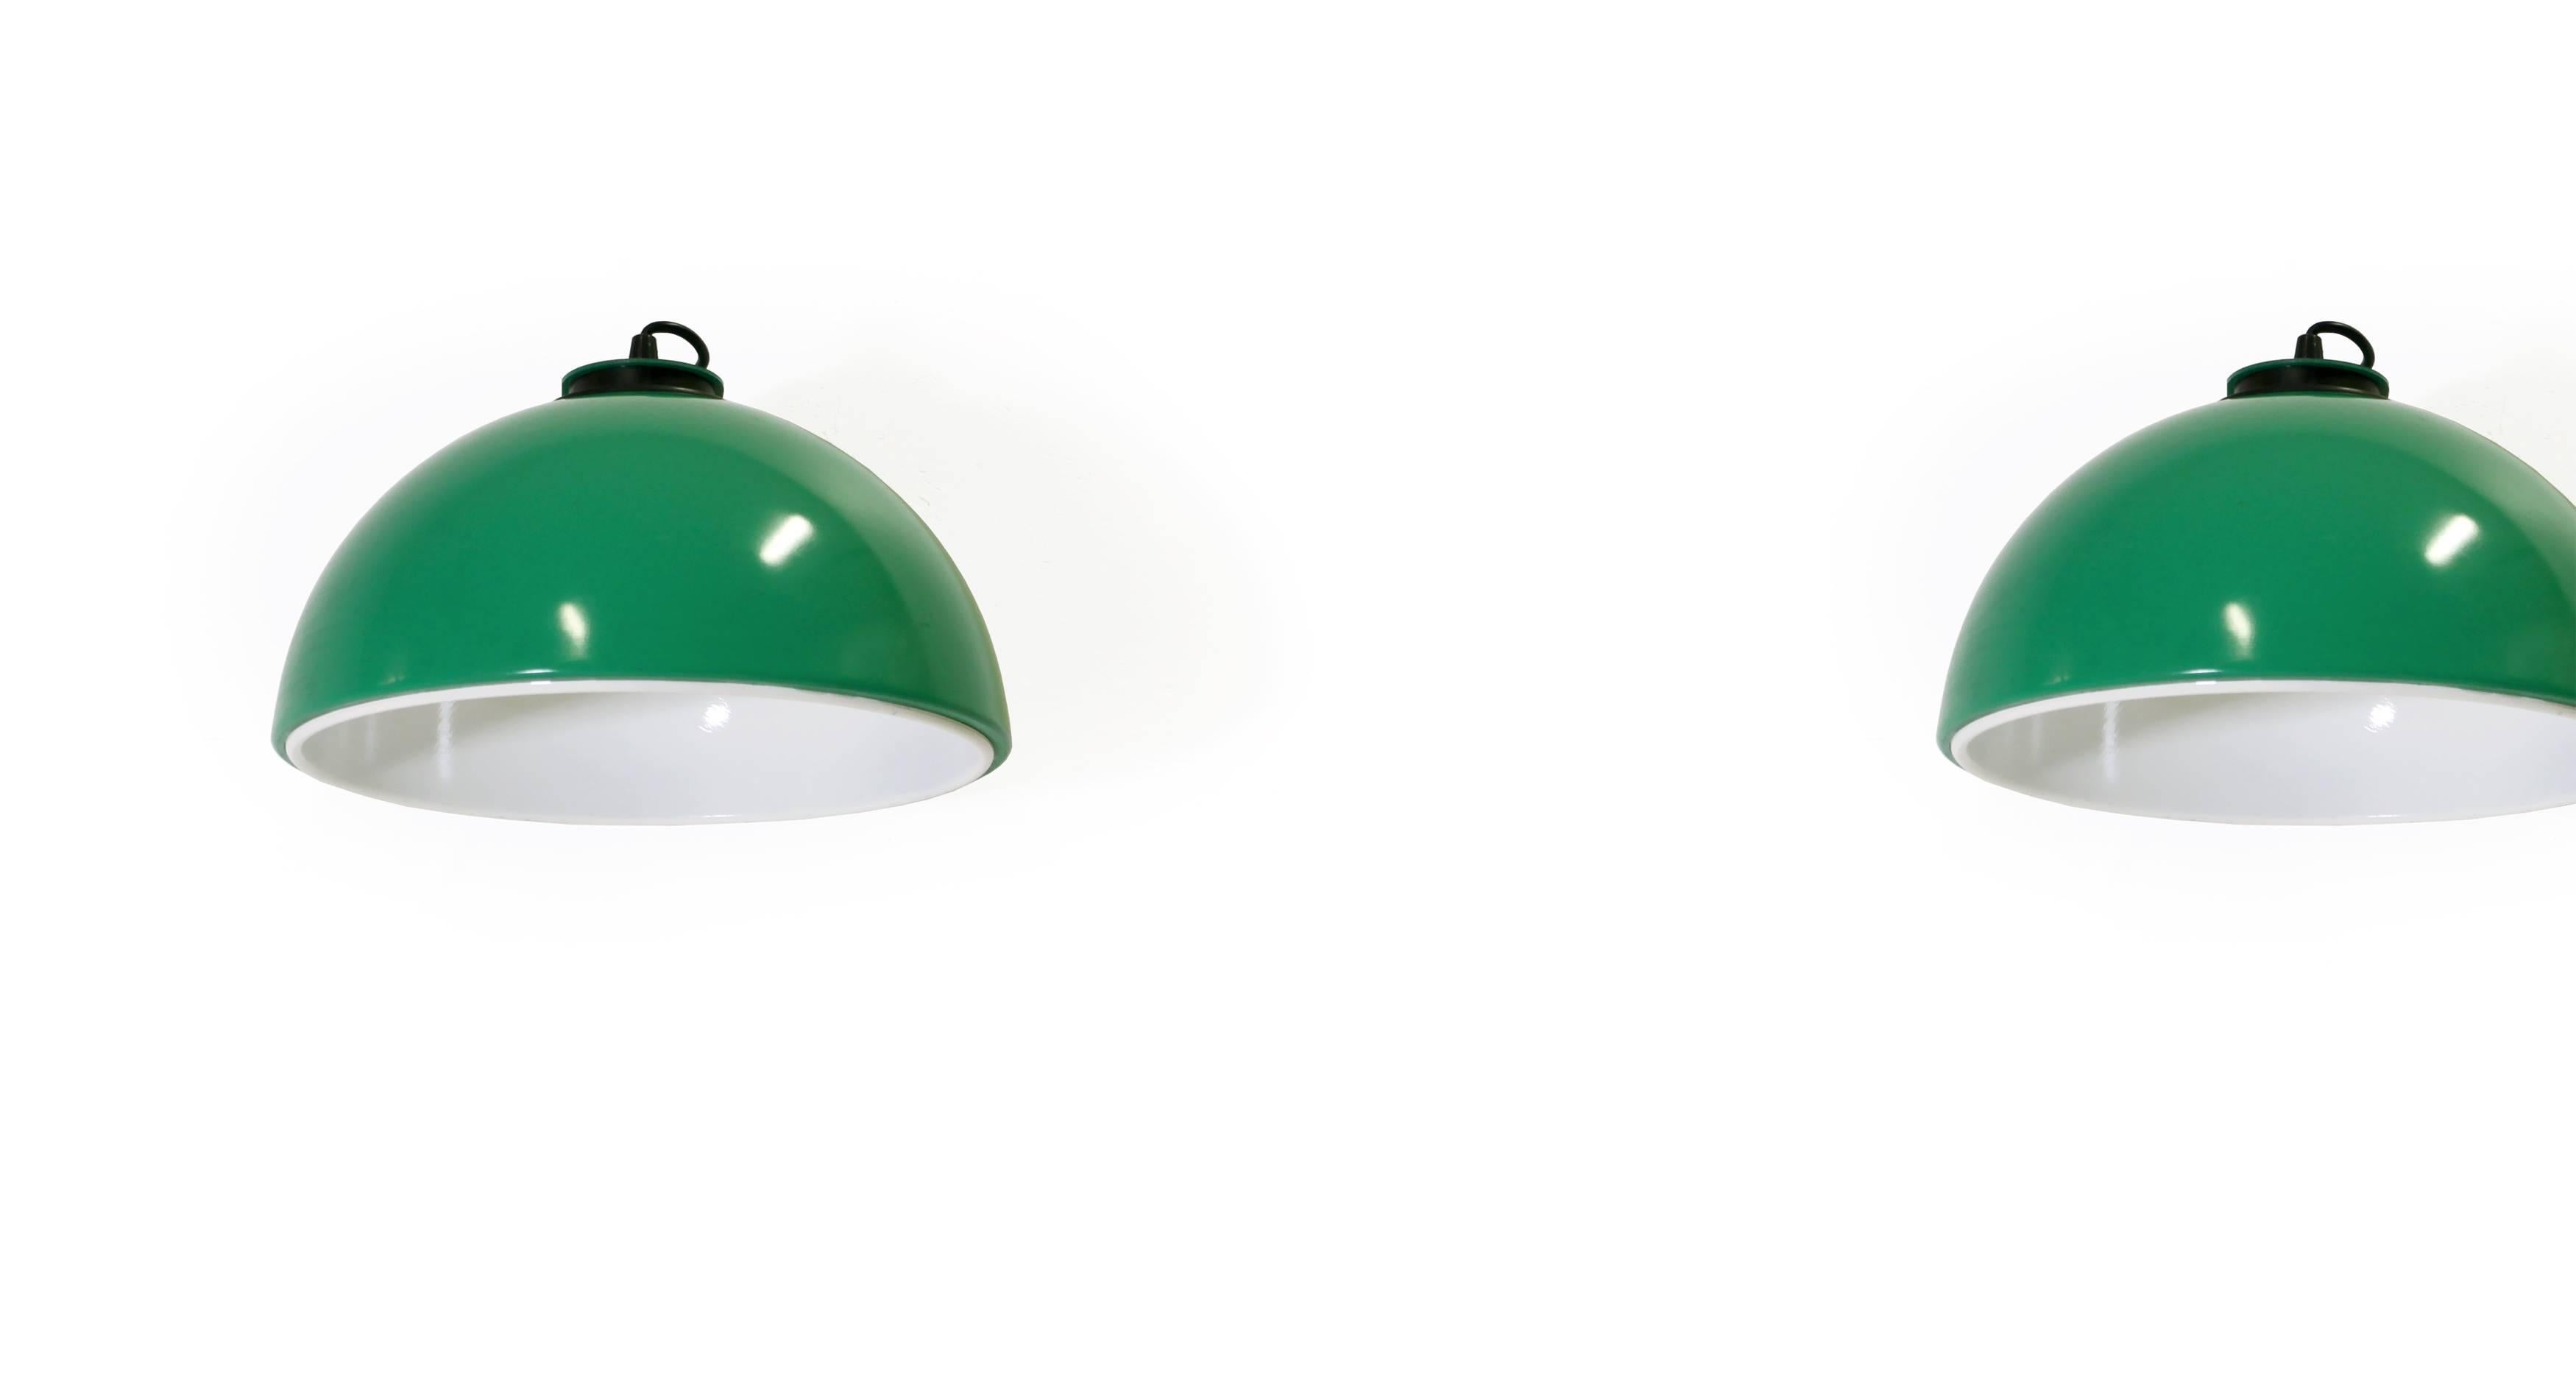 Refreshing and decorative wall lights in painted aluminum. Designed and made by Dalca from circa 1970s first half. Both lamps are fully working and in very good vintage condition. Each lamp is fitted with one E27 bulb (works in the US), with a max